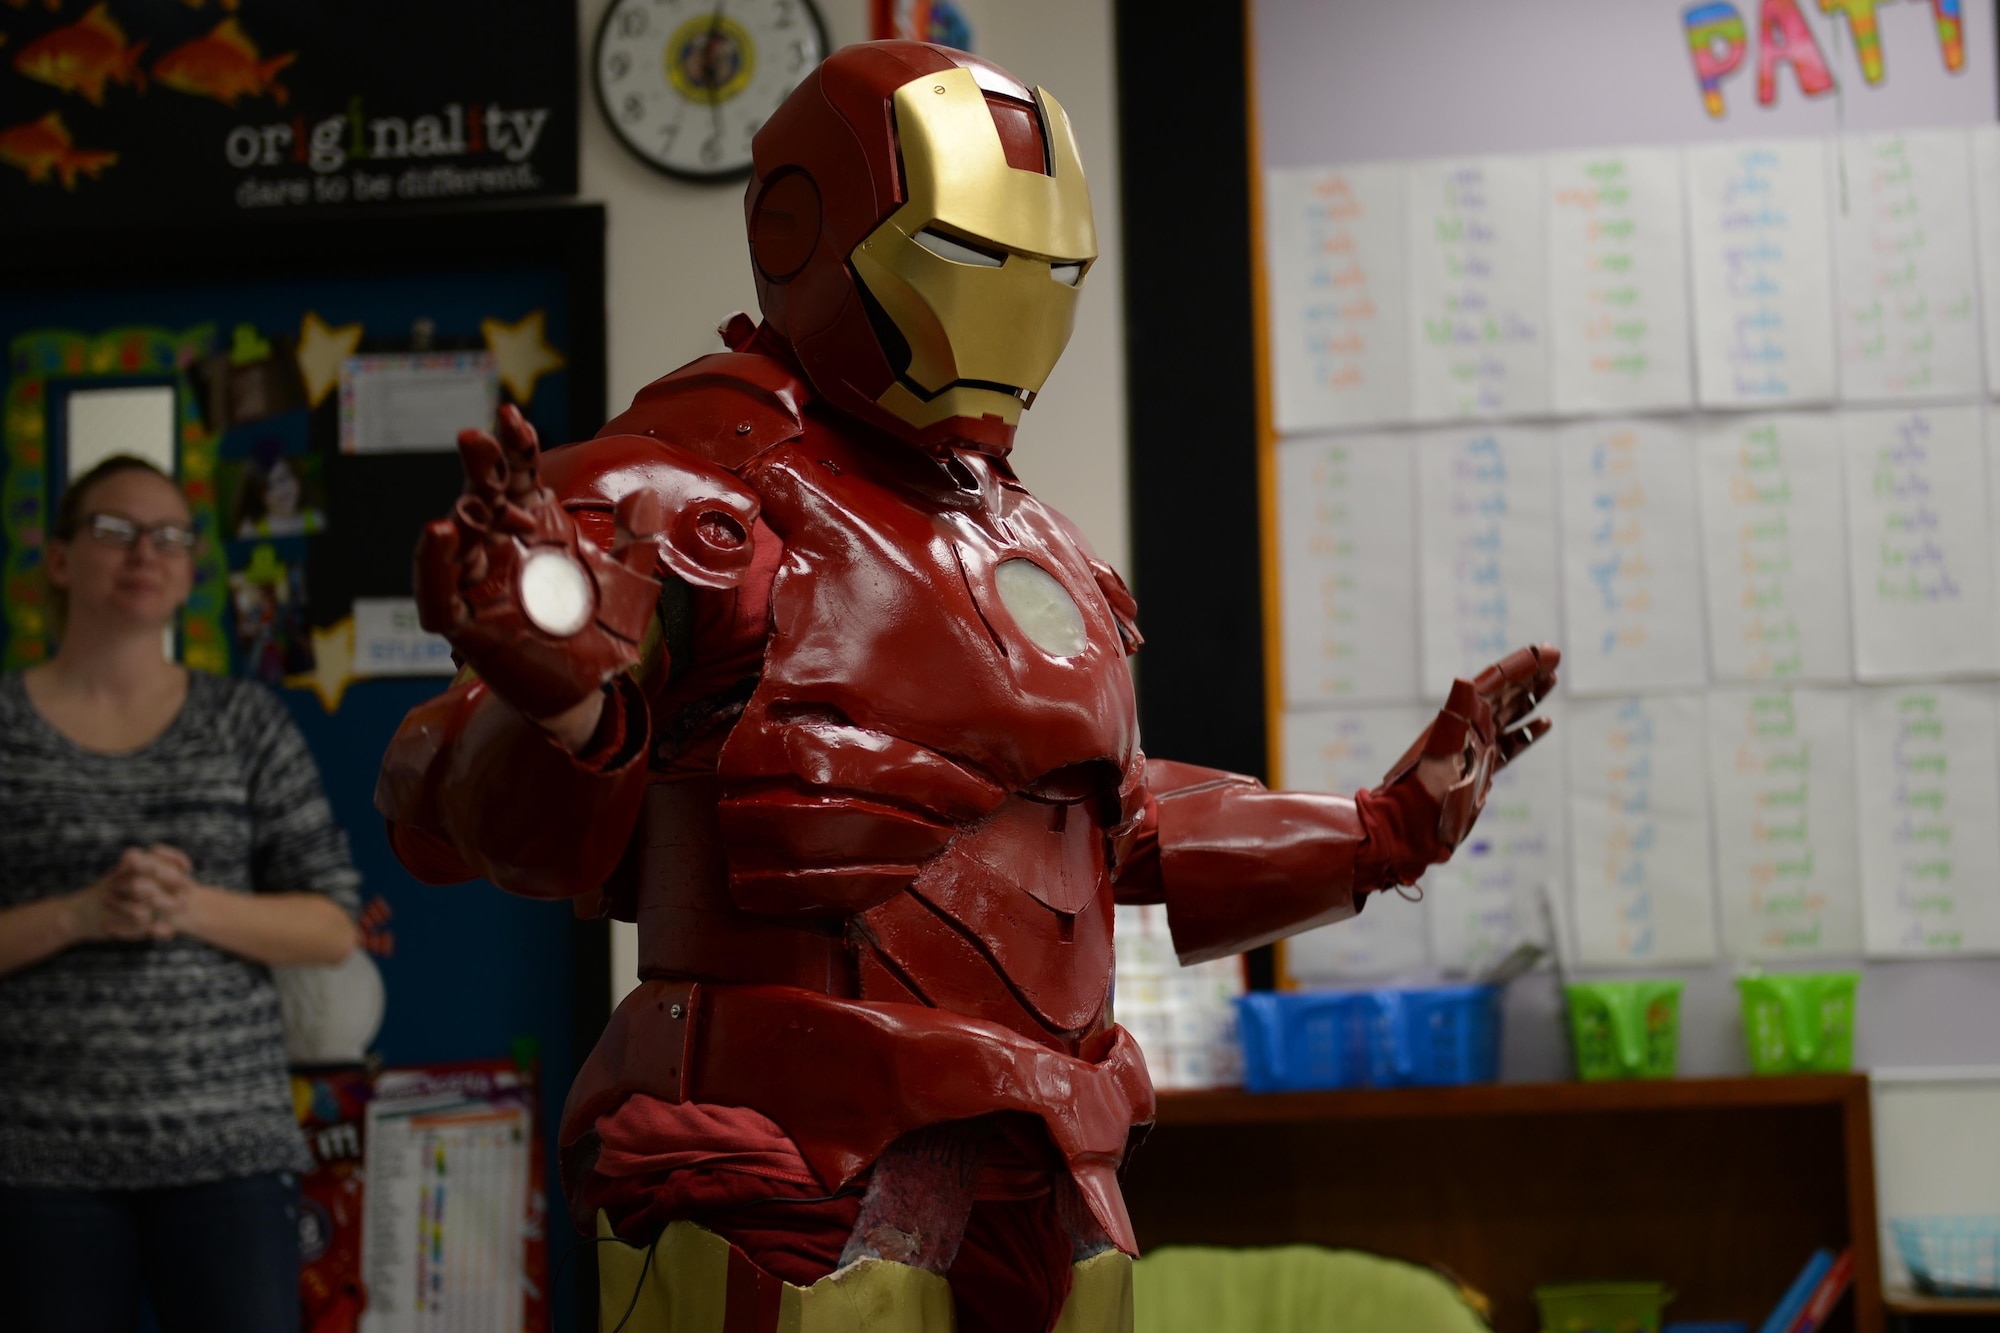 Tech. Sgt. Brian Thornton in his homemade Iron Man suit, visits a classroom at Marrington Elementary Dec. 8, 2014, on Joint Base Charleston - Weapons Station, S.C. Thornton wears his Iron Man suit to local schools and hospitals hoping to help brighten children’s days. Thornton is 628th Air Base Wing Air Defense Council paralegal. (U.S. Air Force photo/Senior Airman Christopher Reel)